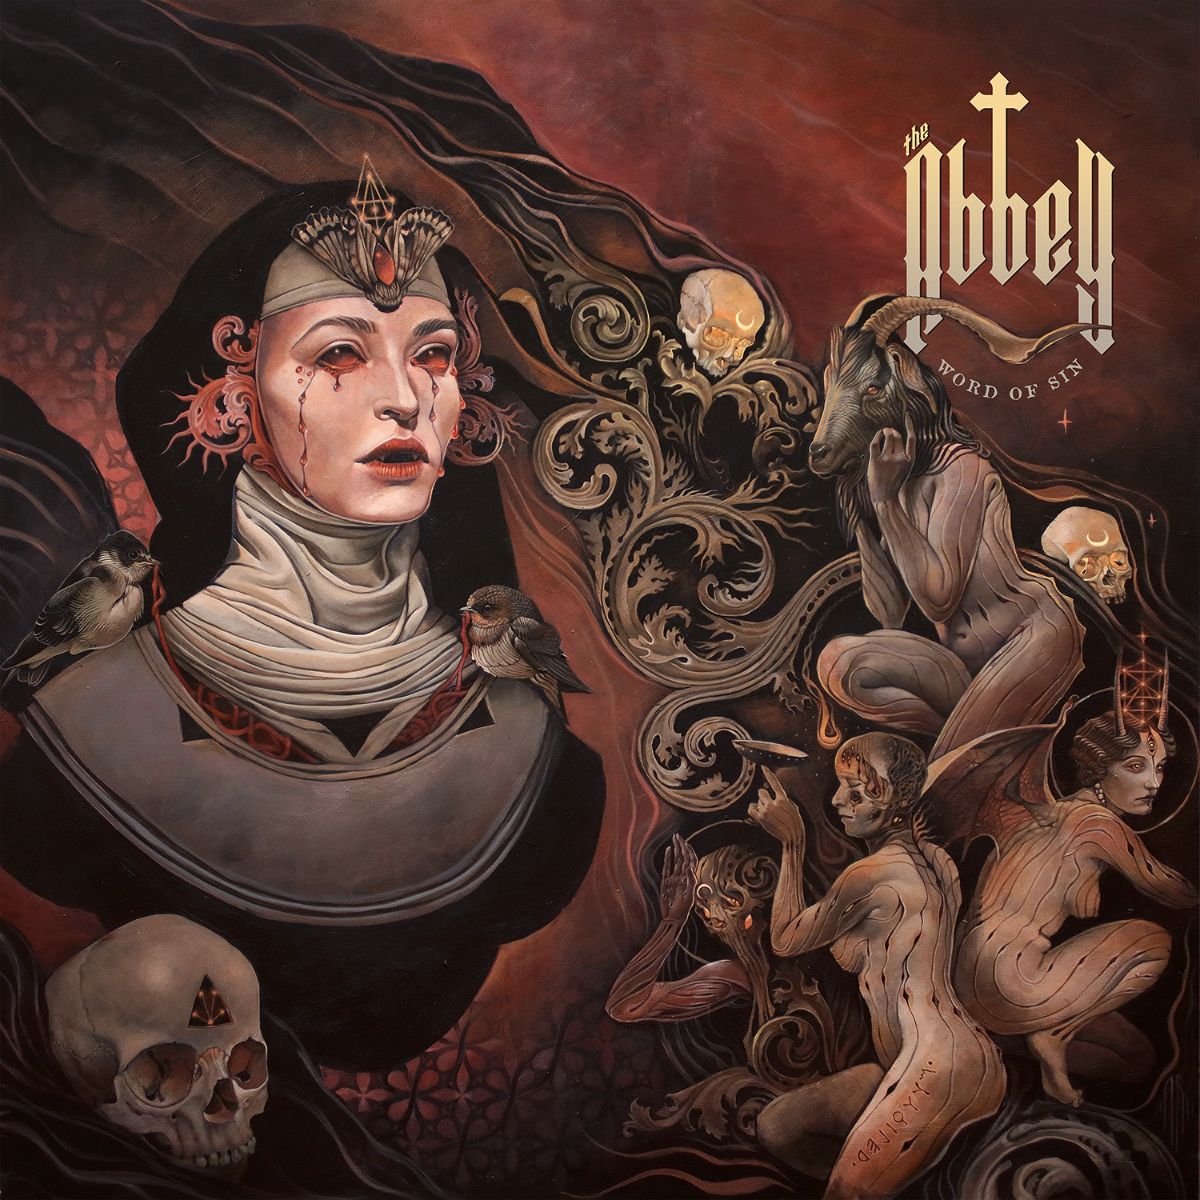 The Abbey – World of sin (metal gothique)